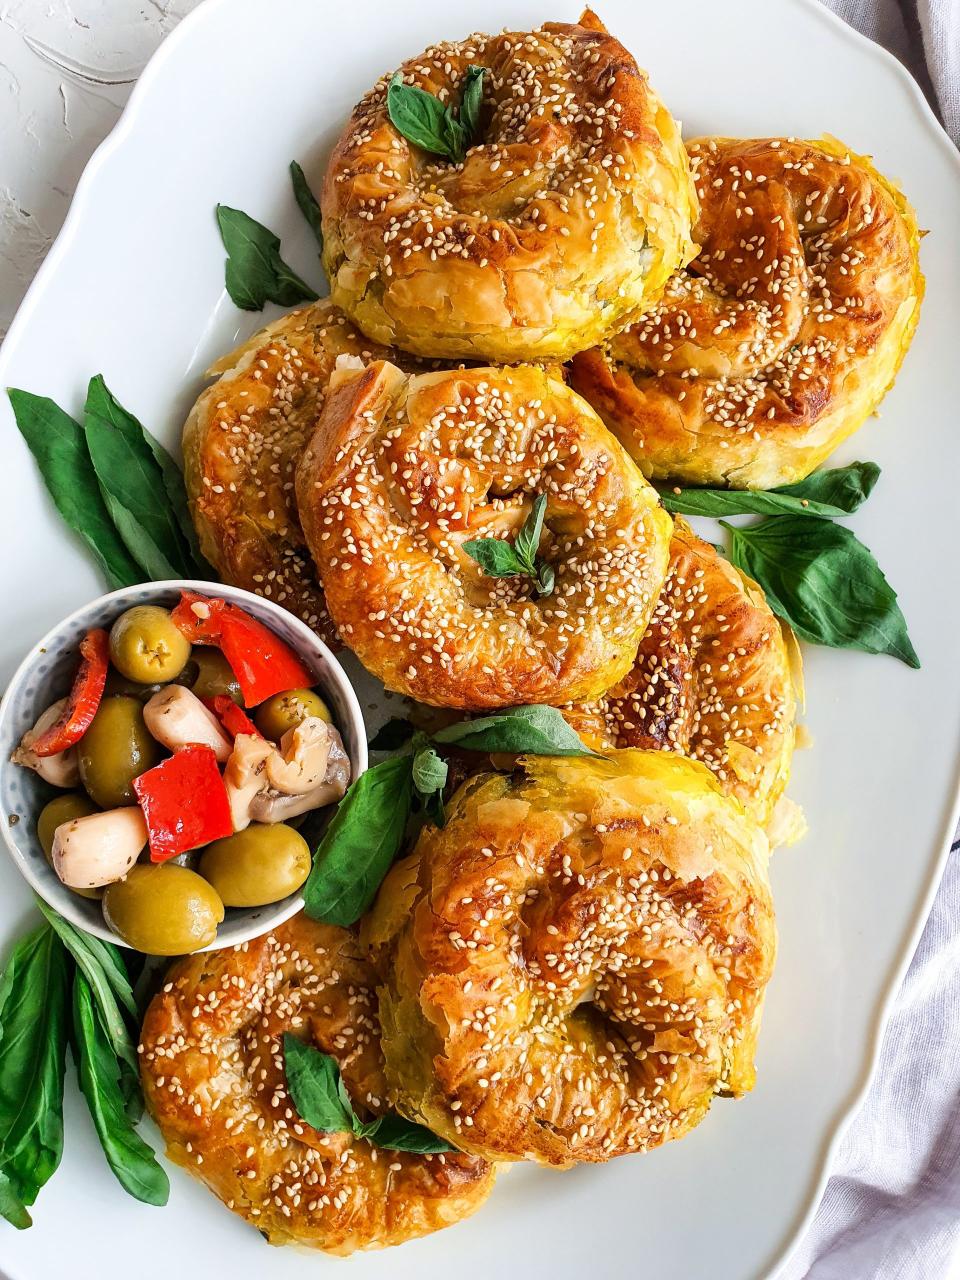 Turkish Pastry With Cheese and Spinach - PEANUTSWIRLS